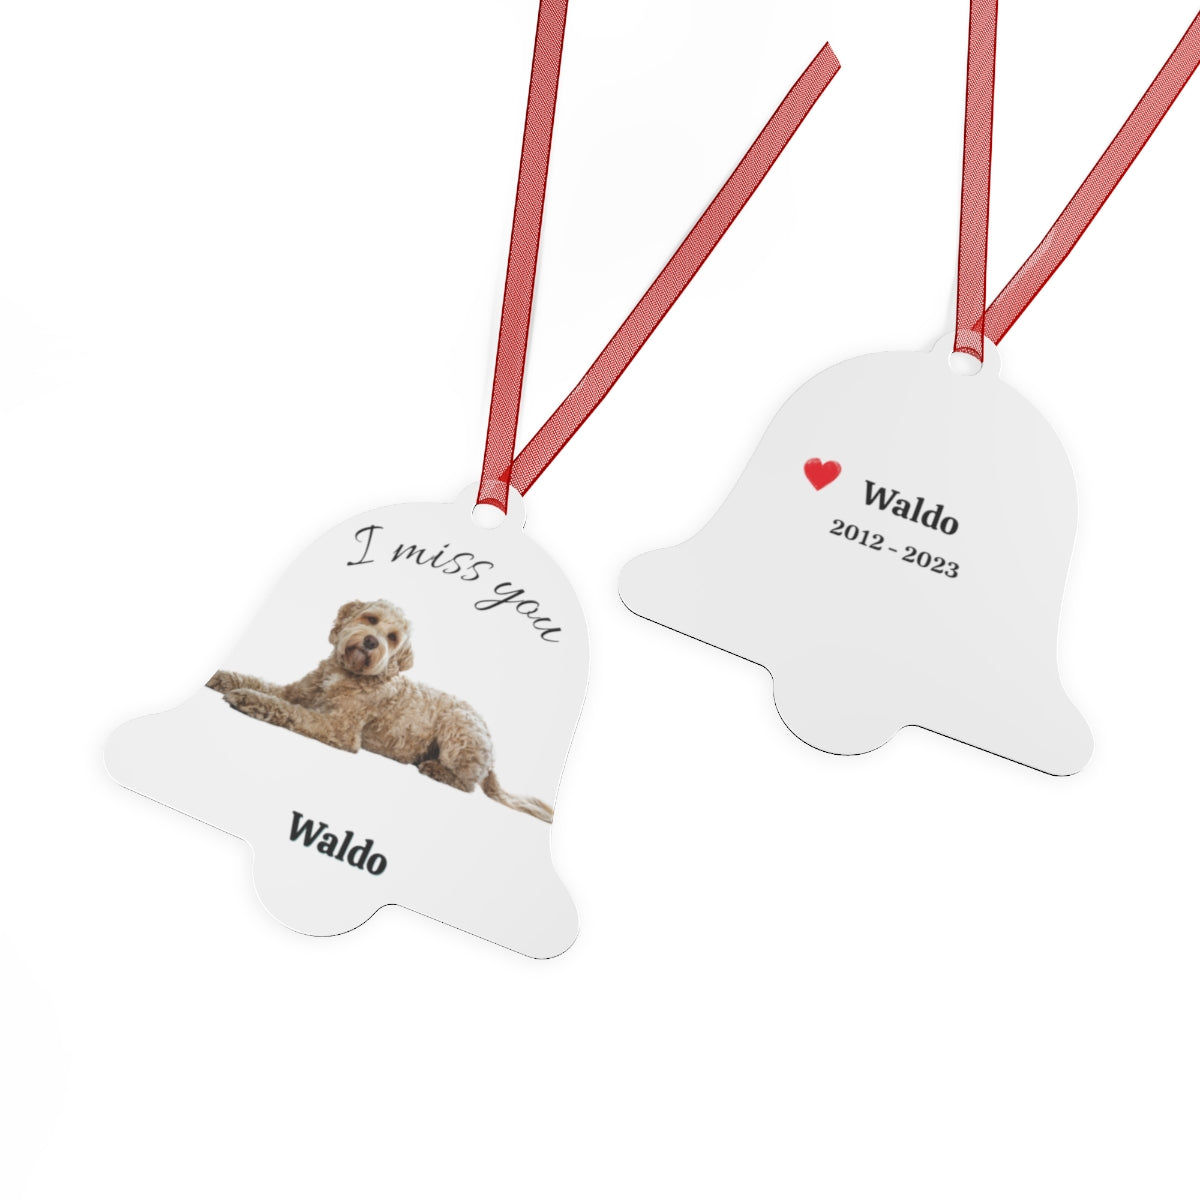 Personalized Pet Ornament with Photo